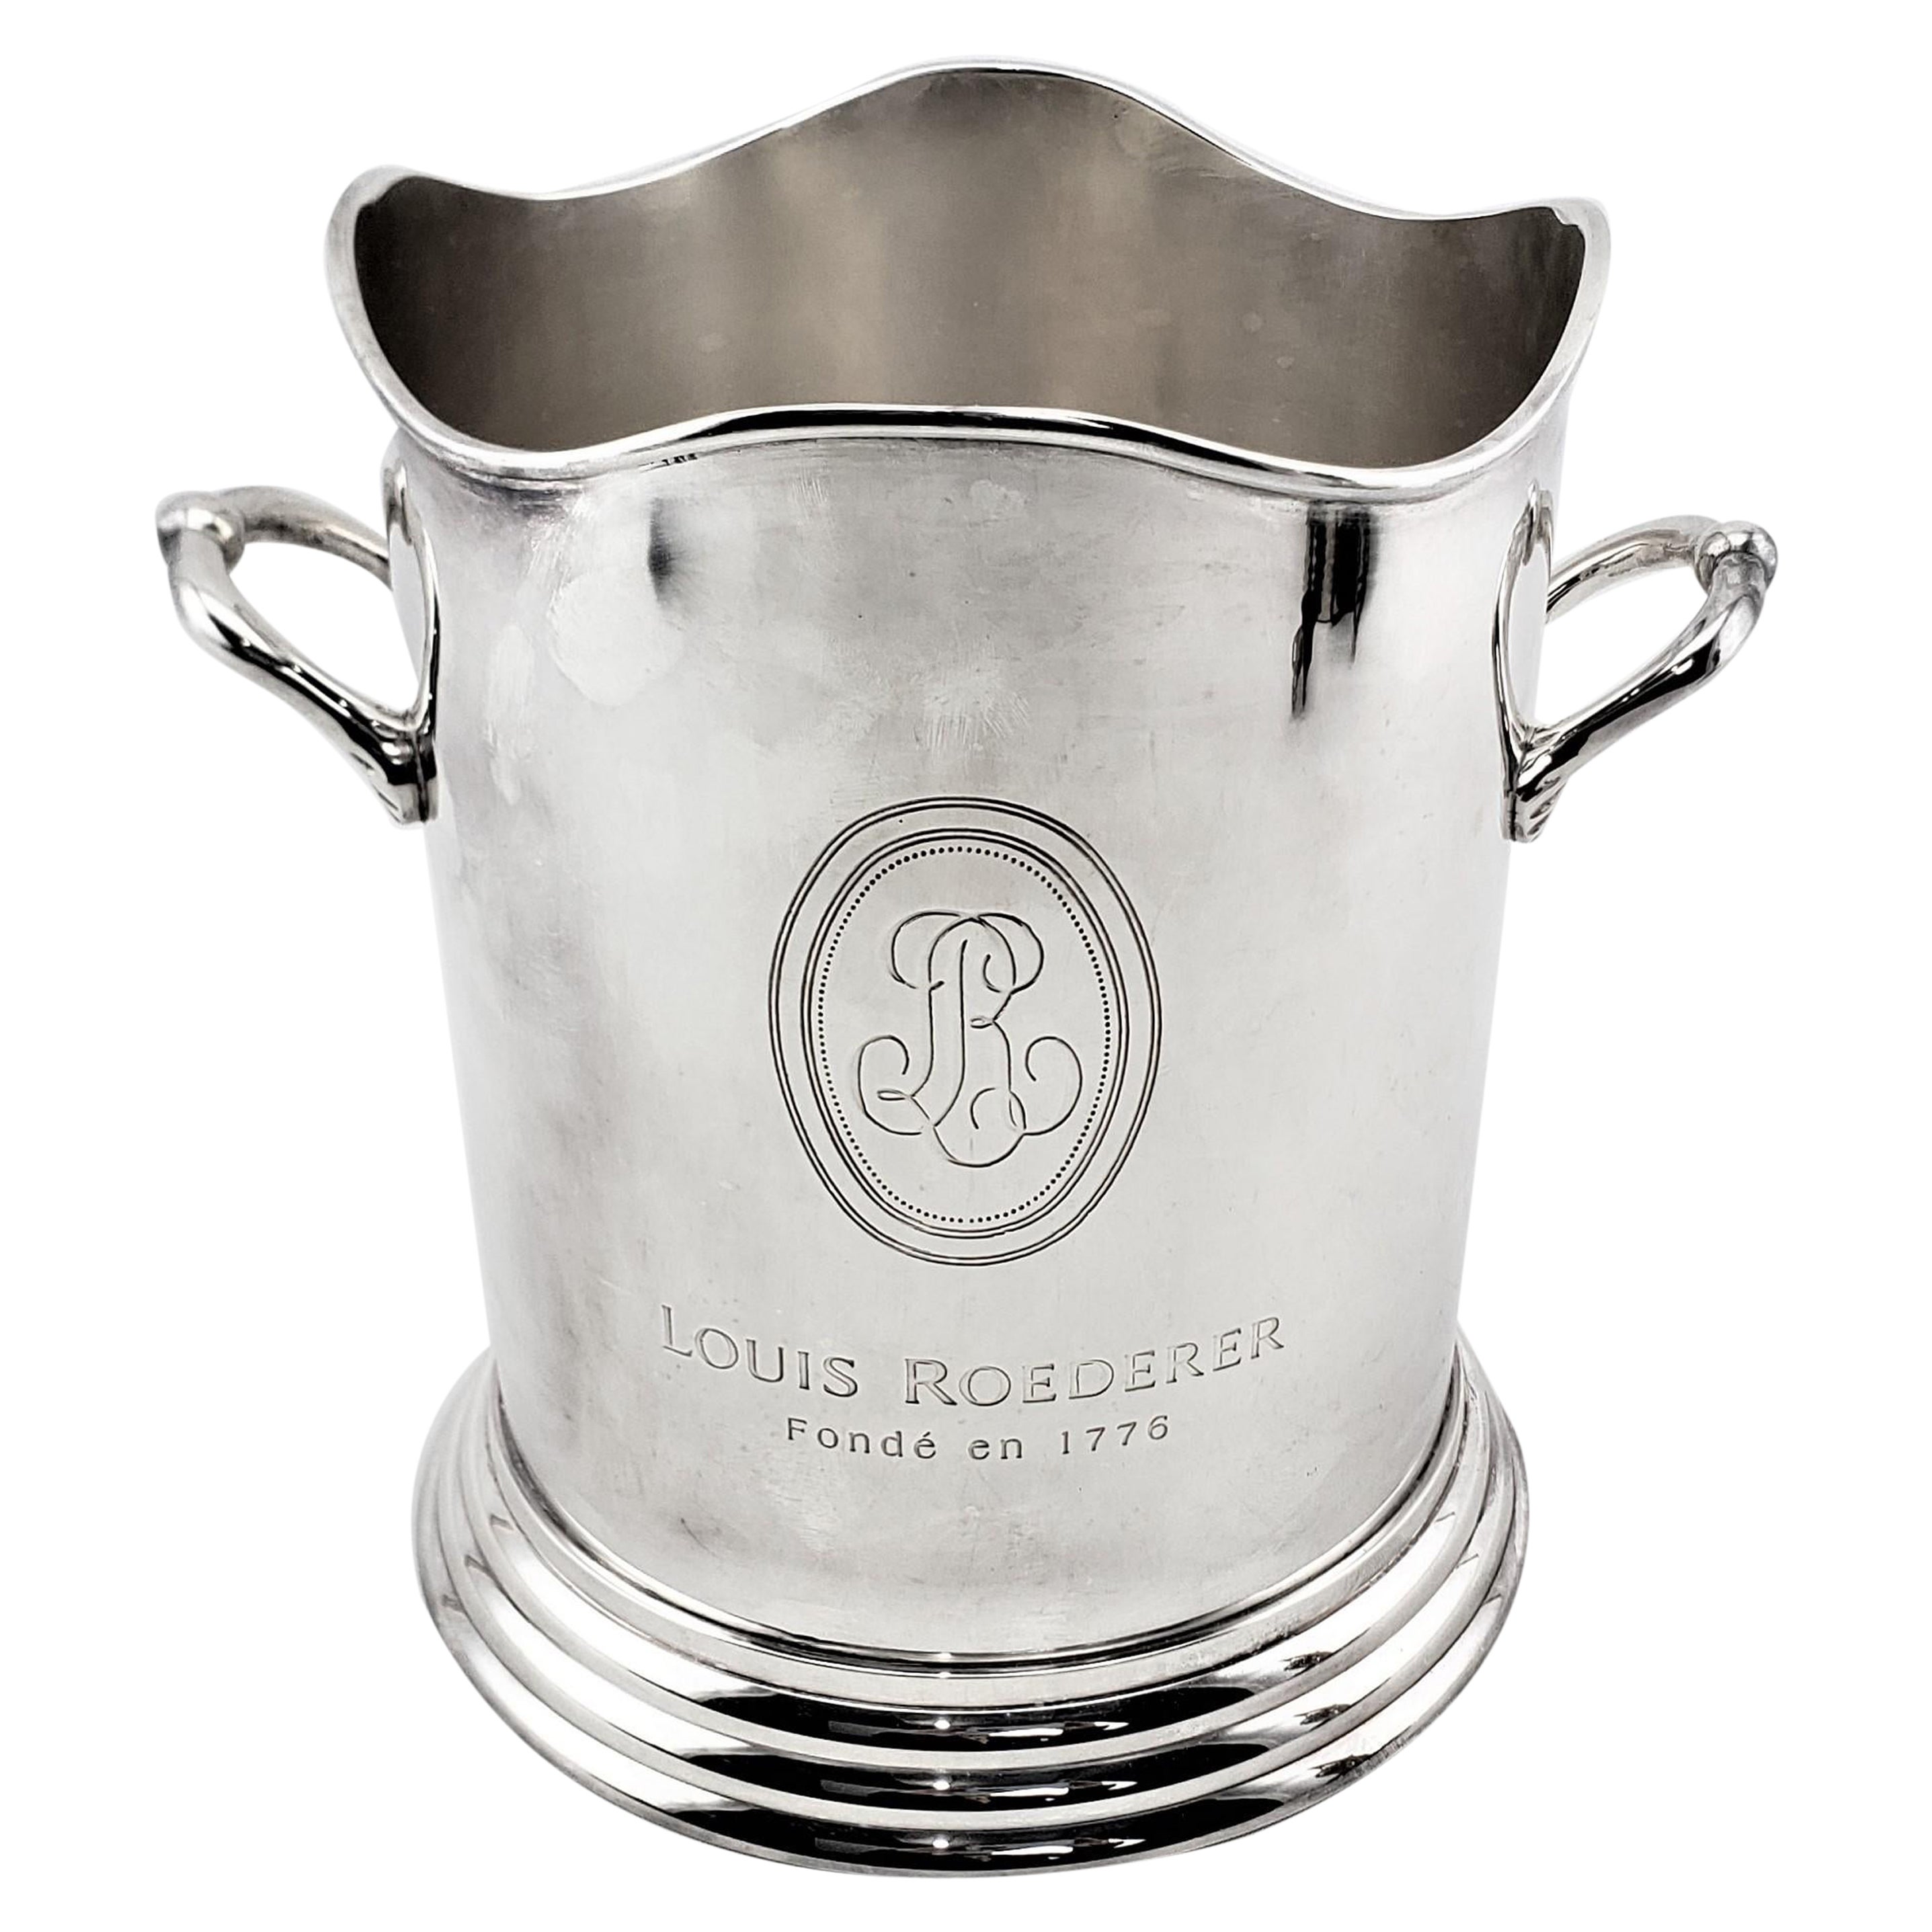 Louis Roederer Commemorative Mid-Century Era Chrome Plated Champagne Bucket For Sale